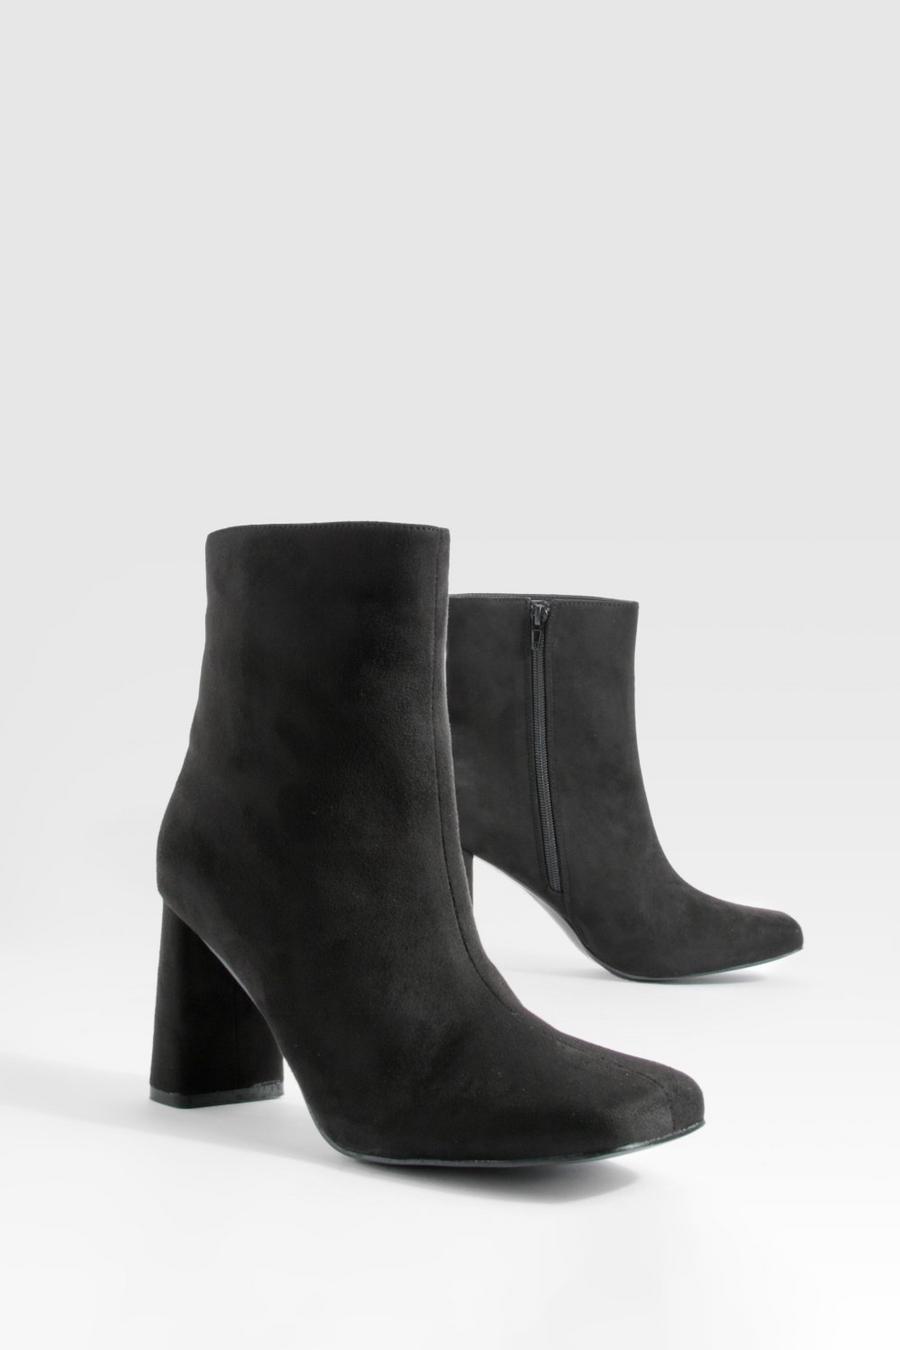 Black Wide Fit Block Heel Faux Suede Ankle Boots